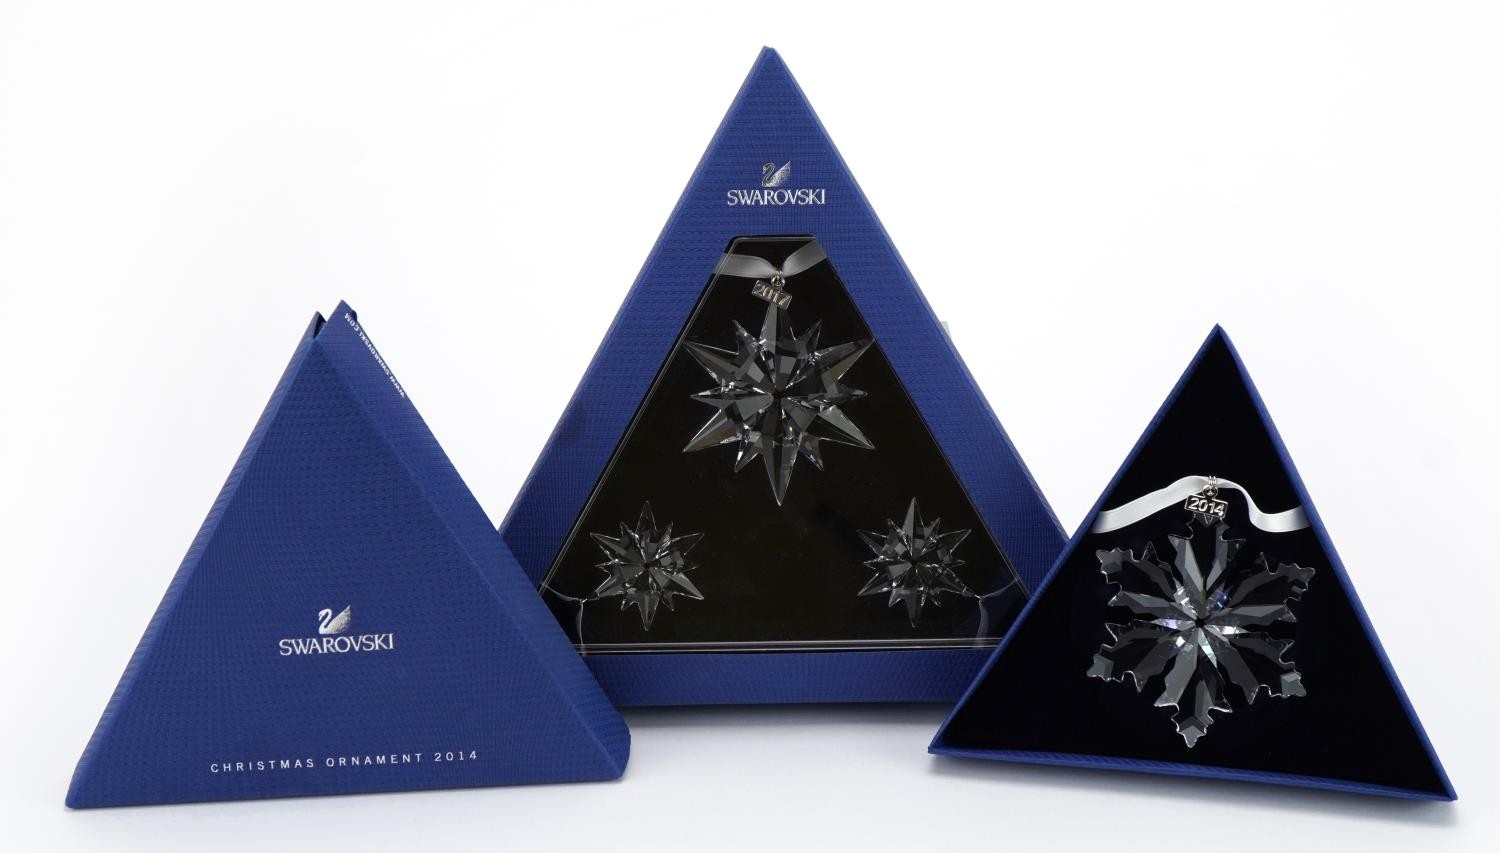 Two Swarovski Crystal Christmas ornaments with boxes comprising dates 2014 and 2017